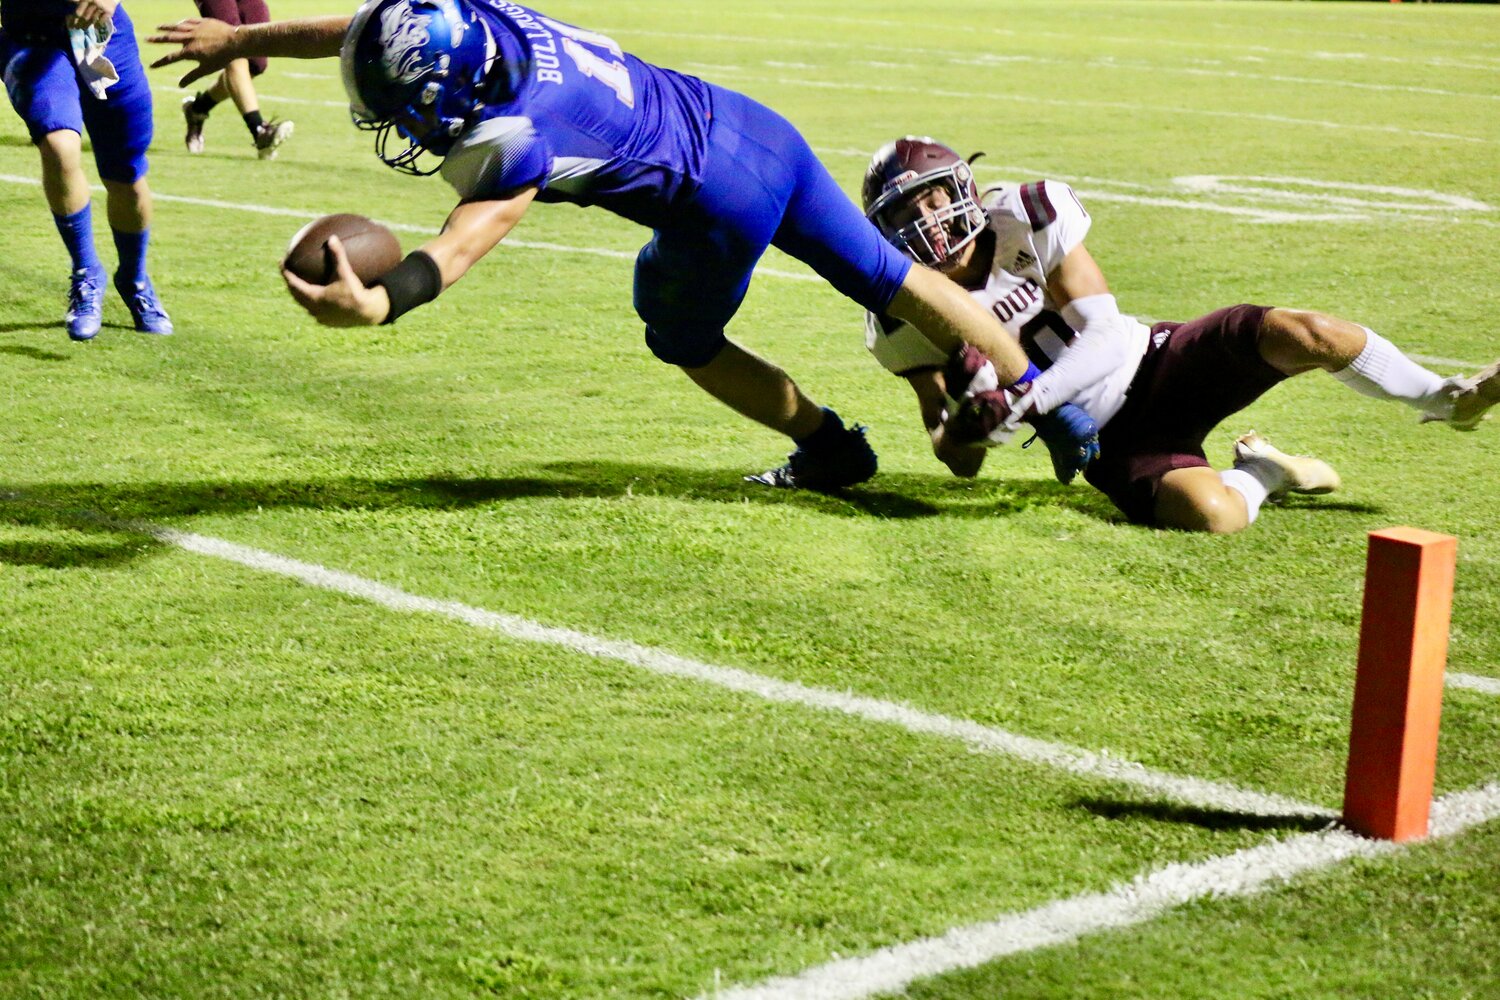 Klayton Meadows of Quitman dives for the end zone against Troup Friday.